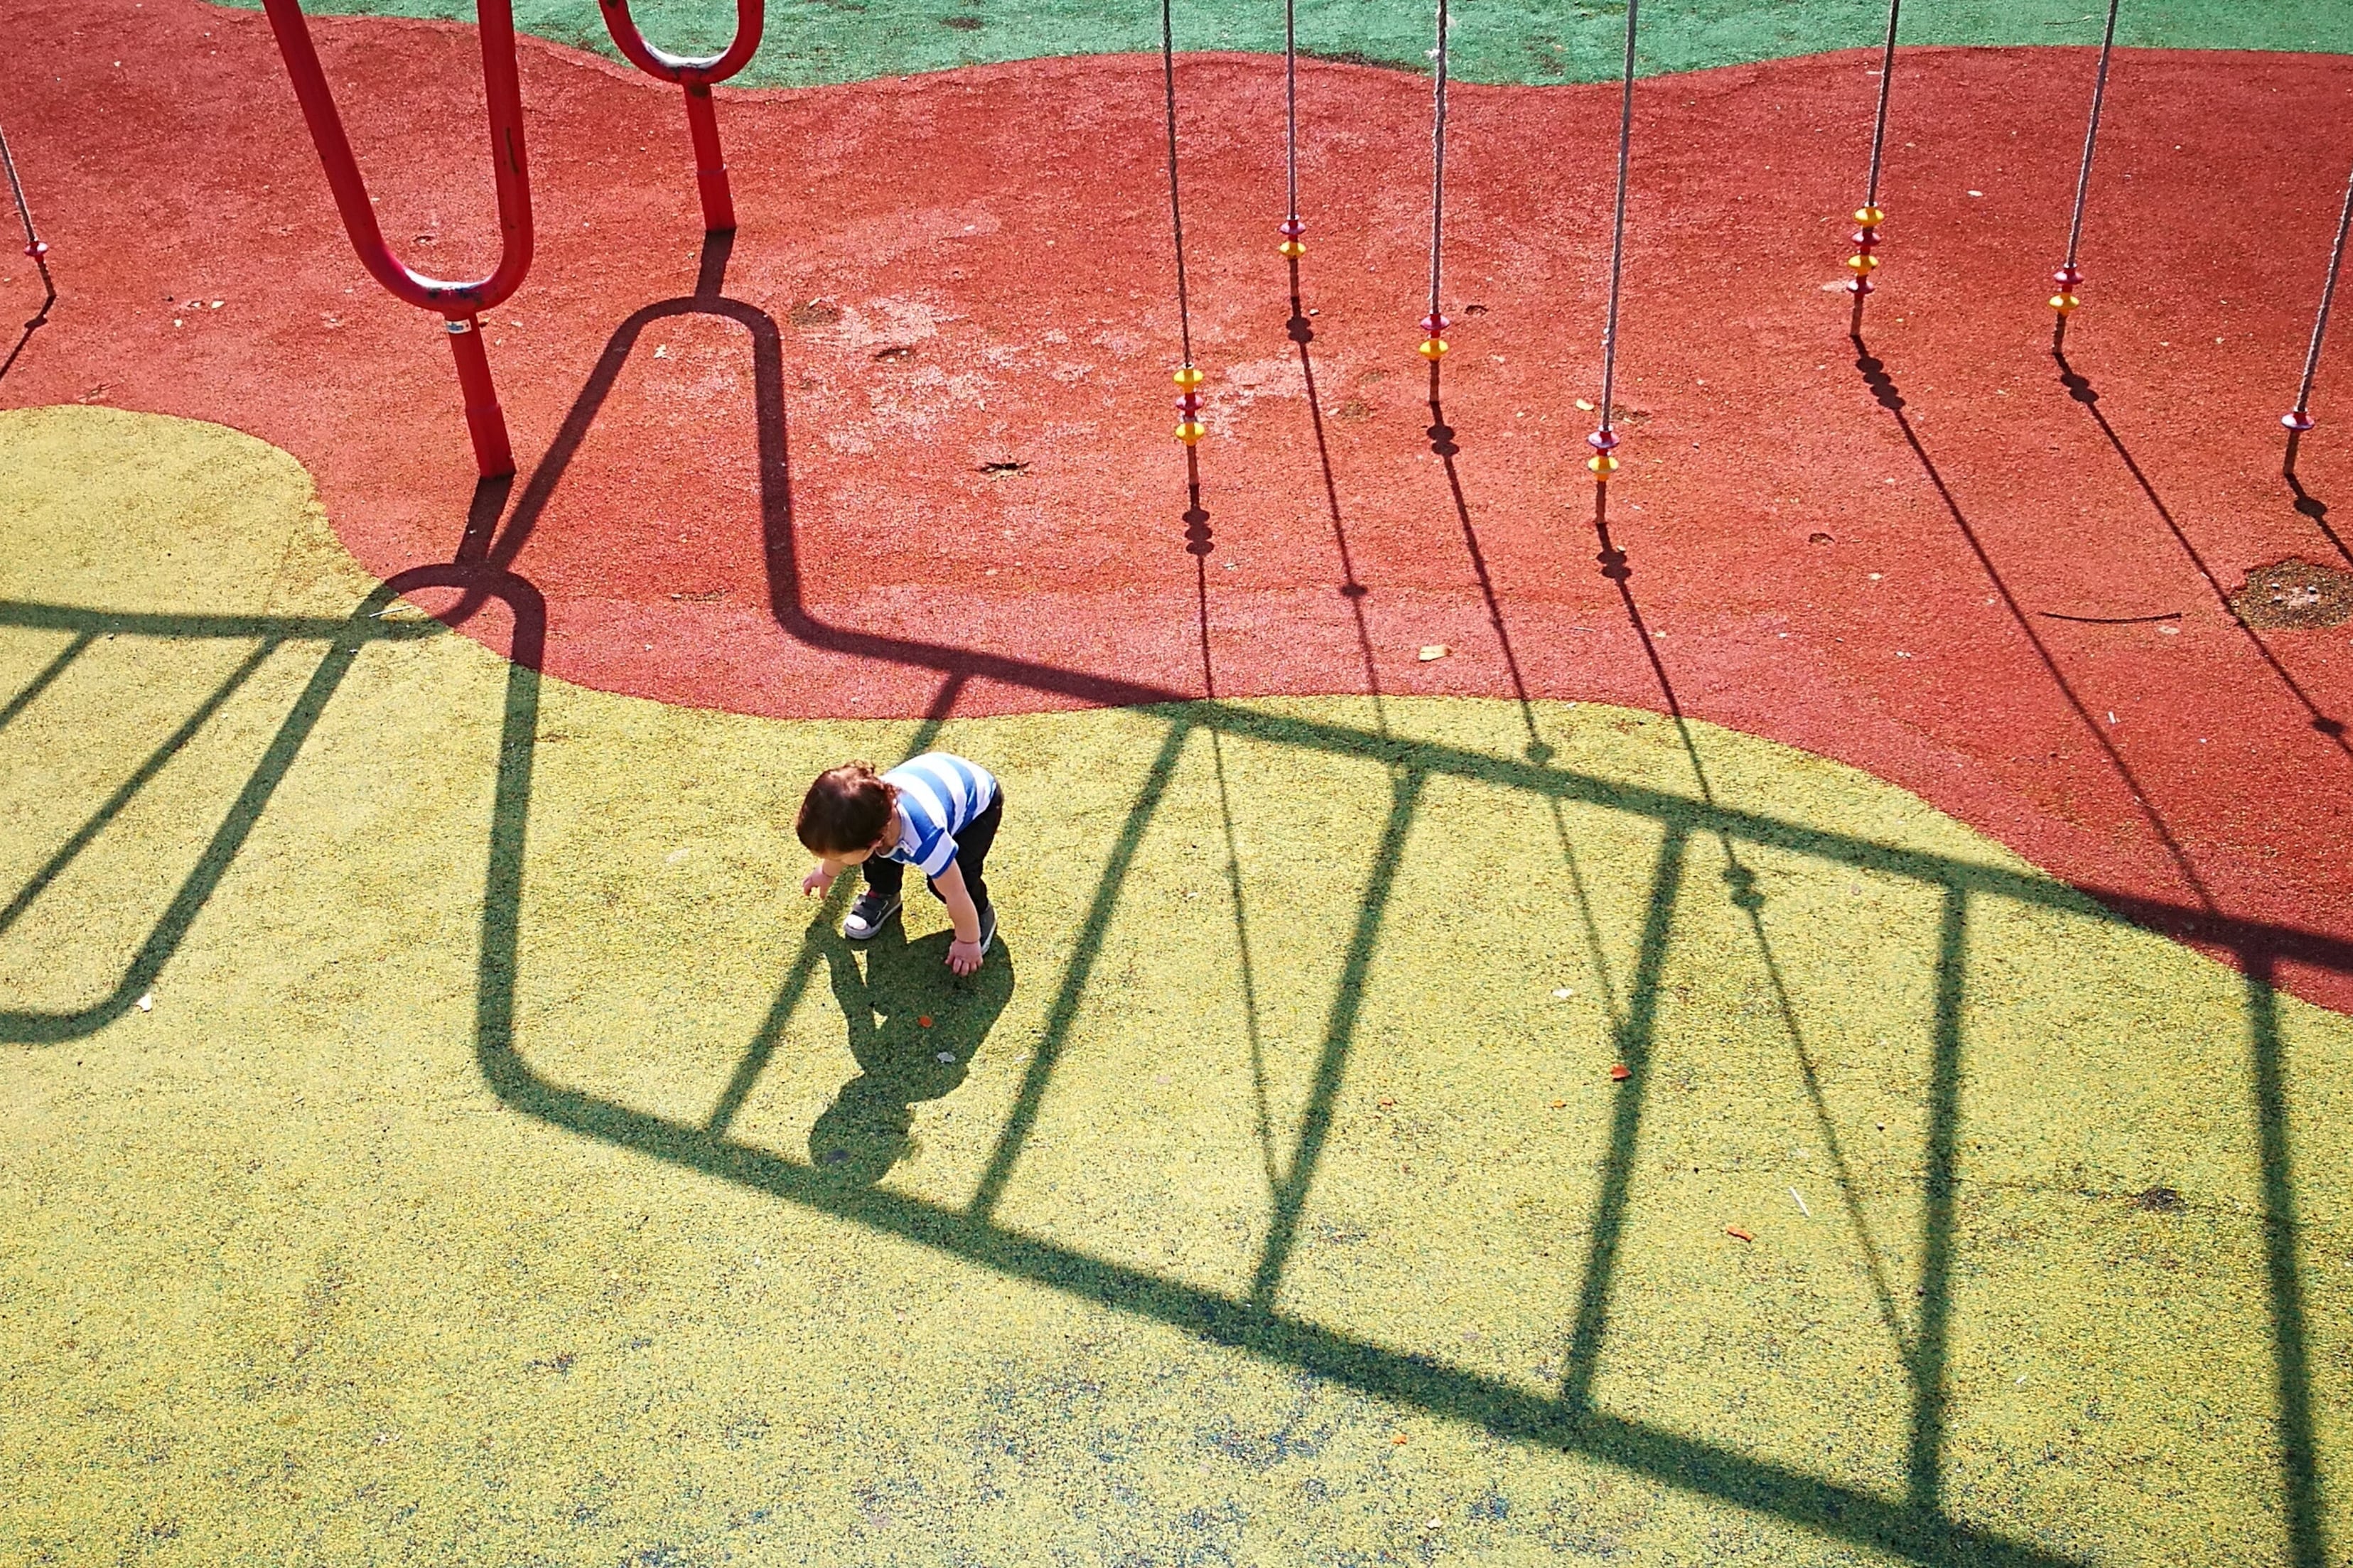 A small boy leans down to touch his shadow on a red and yellow playground surface.